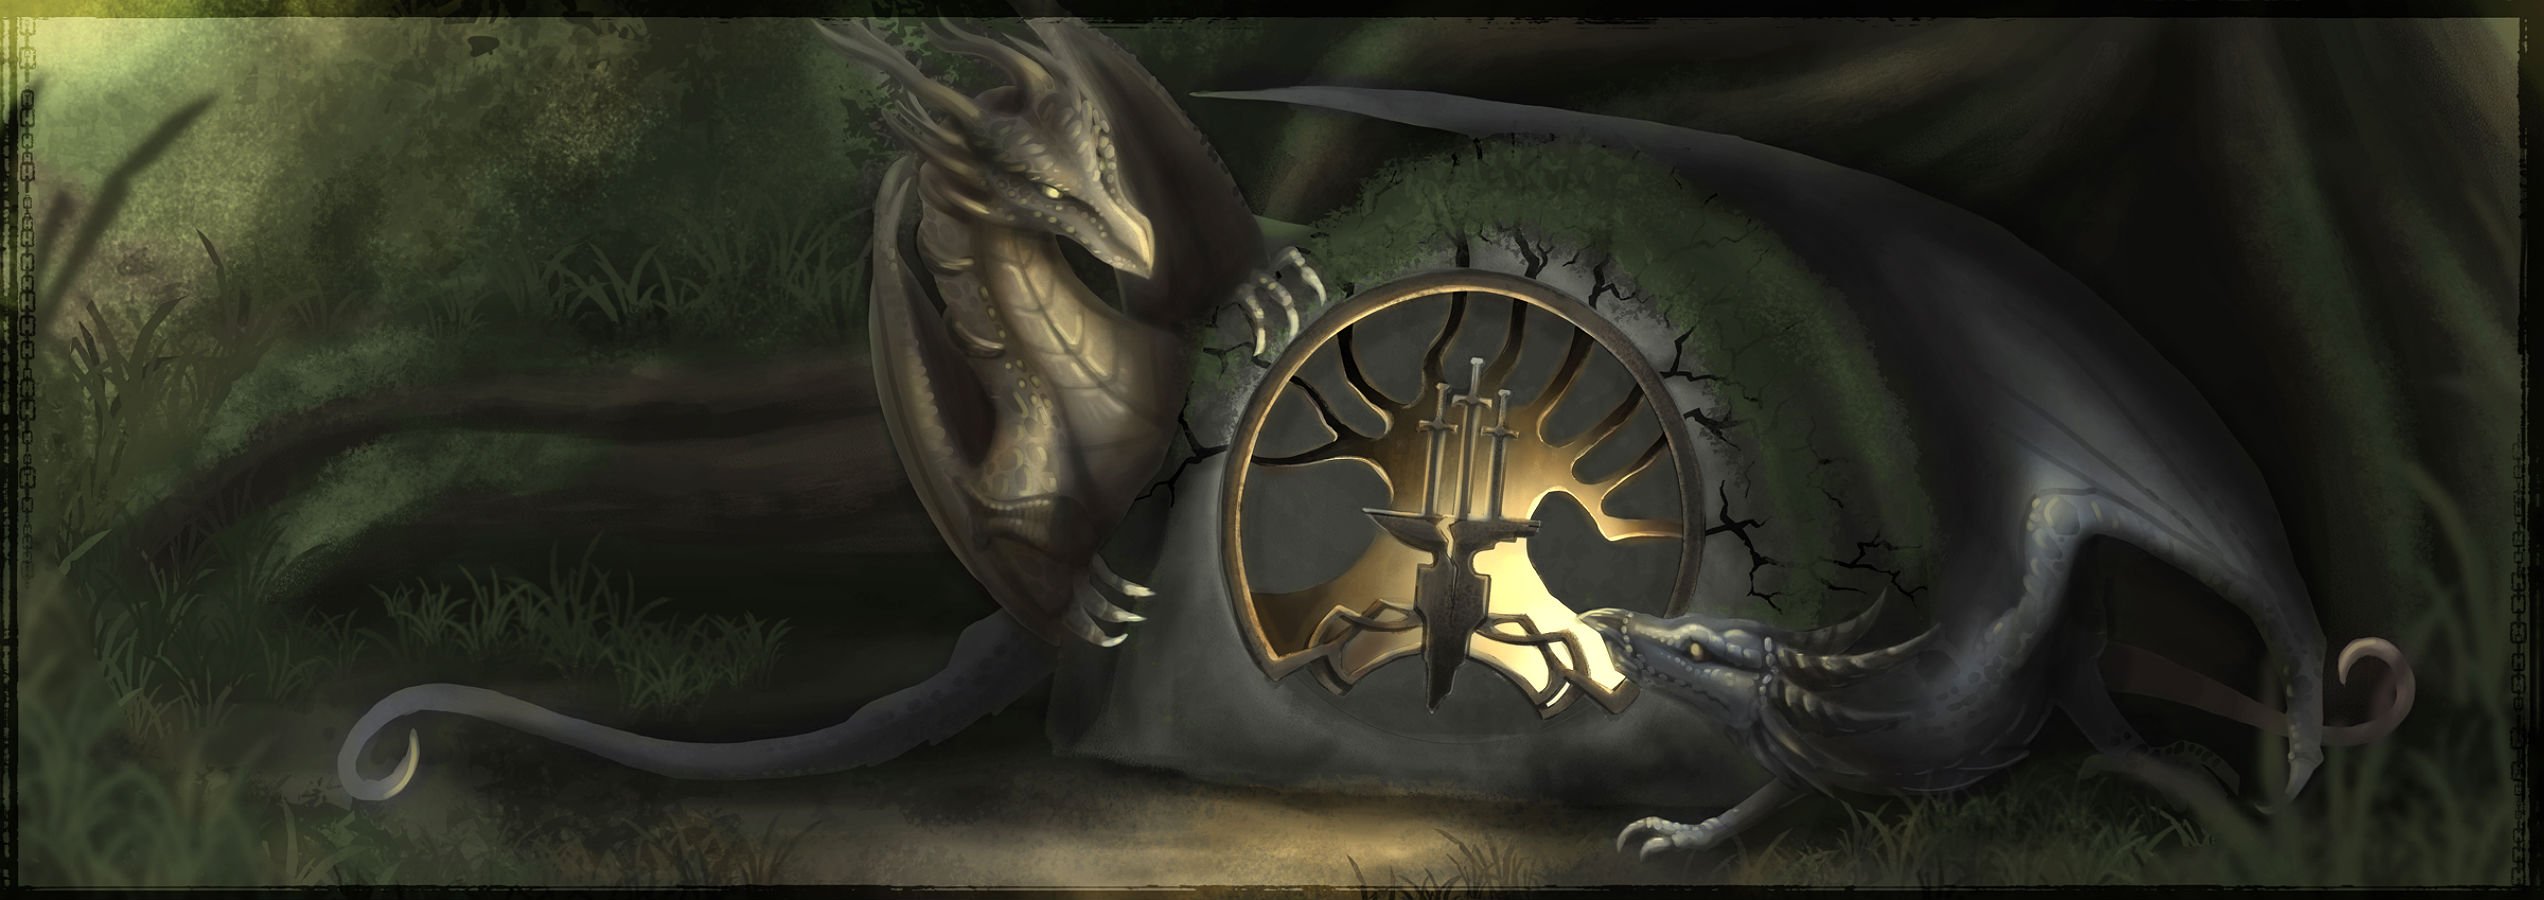 camelot, Unchained, Counter, Revolutionary, Fantasy, Action, Mmo, Rpg, Online, 1camun, Strategy, Dragon, Artwork Wallpaper